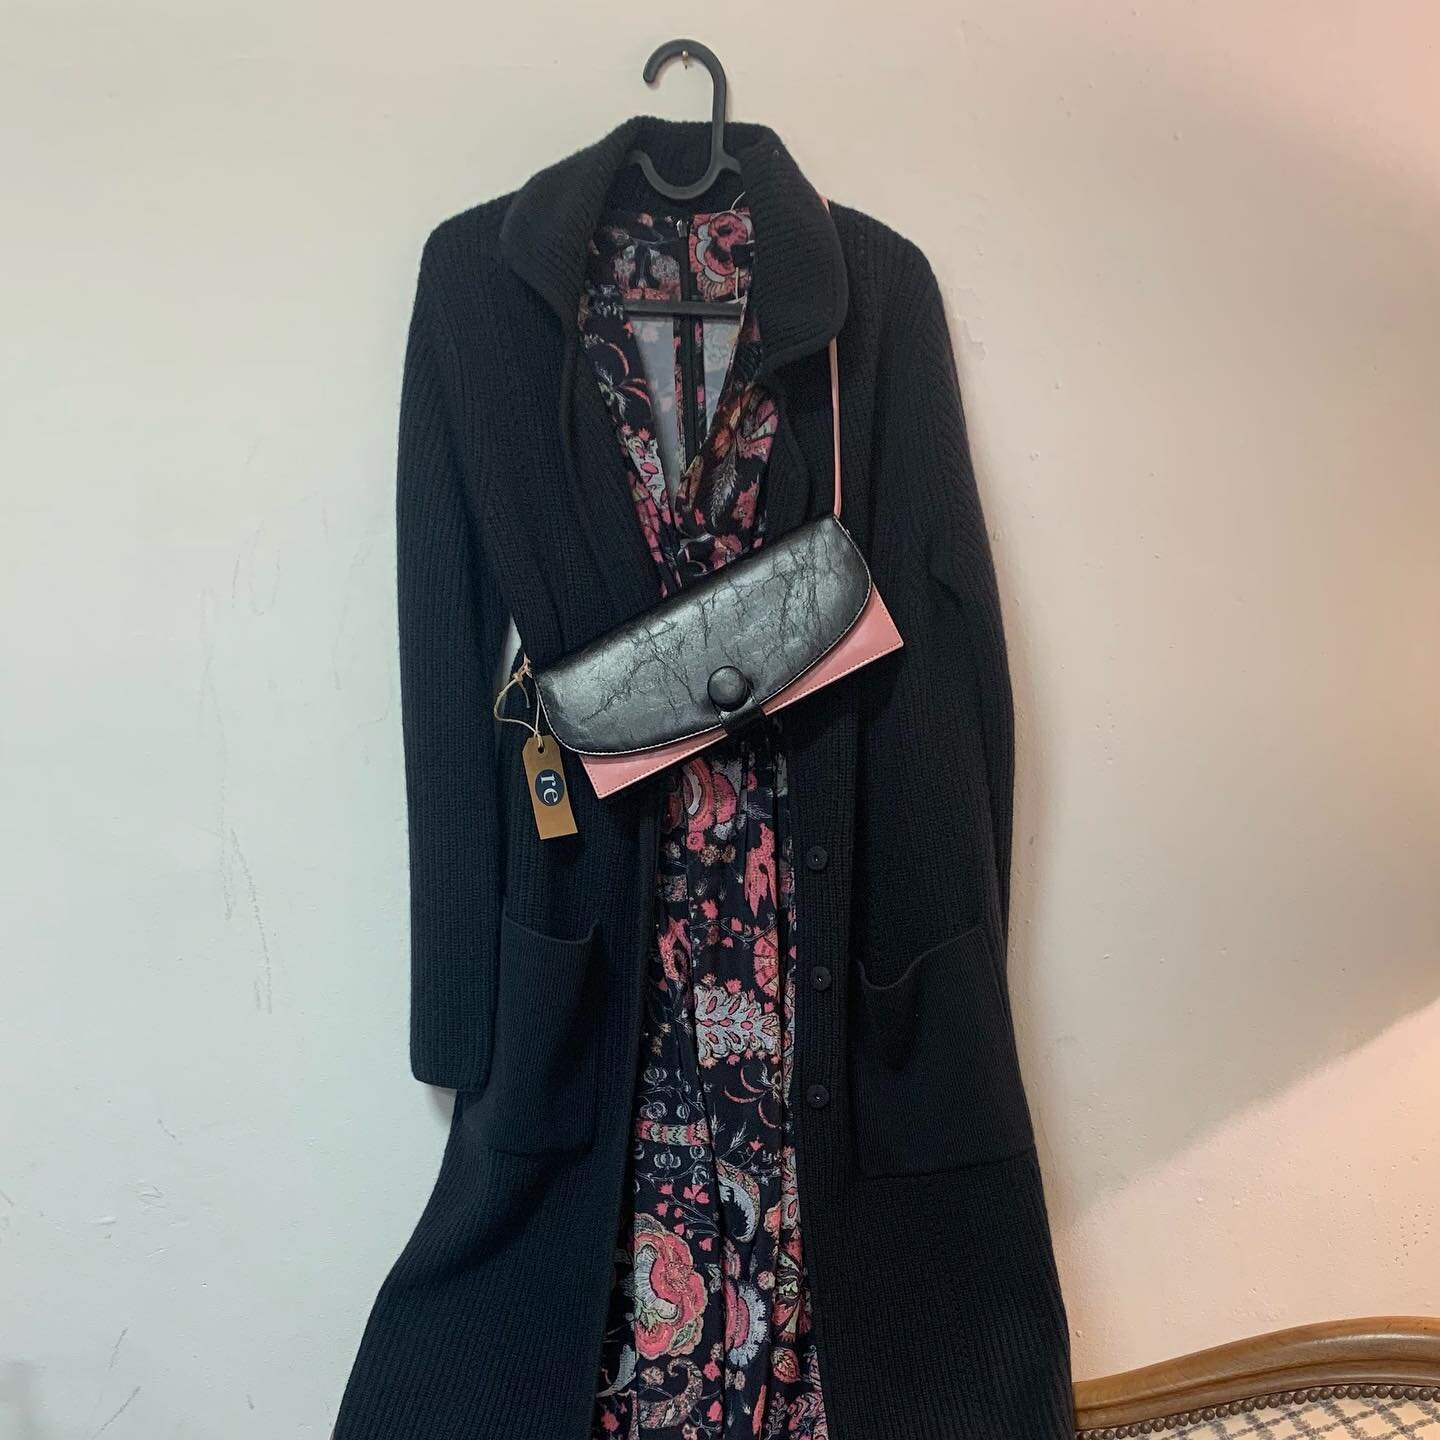 Cosy chic 🌸🌸🌸

Robe Isabel Marant / taille 40/ CHF 199.-
Jaquette N.Peal / taille S / CHF 179.- 
Bottines R  essentiel / taille 35 / CHF 44.- 
Sac &agrave; main / CHF 39.- 
.
.
.

#revive #reviveforgood #betterclothesforless #circularfashion #slow